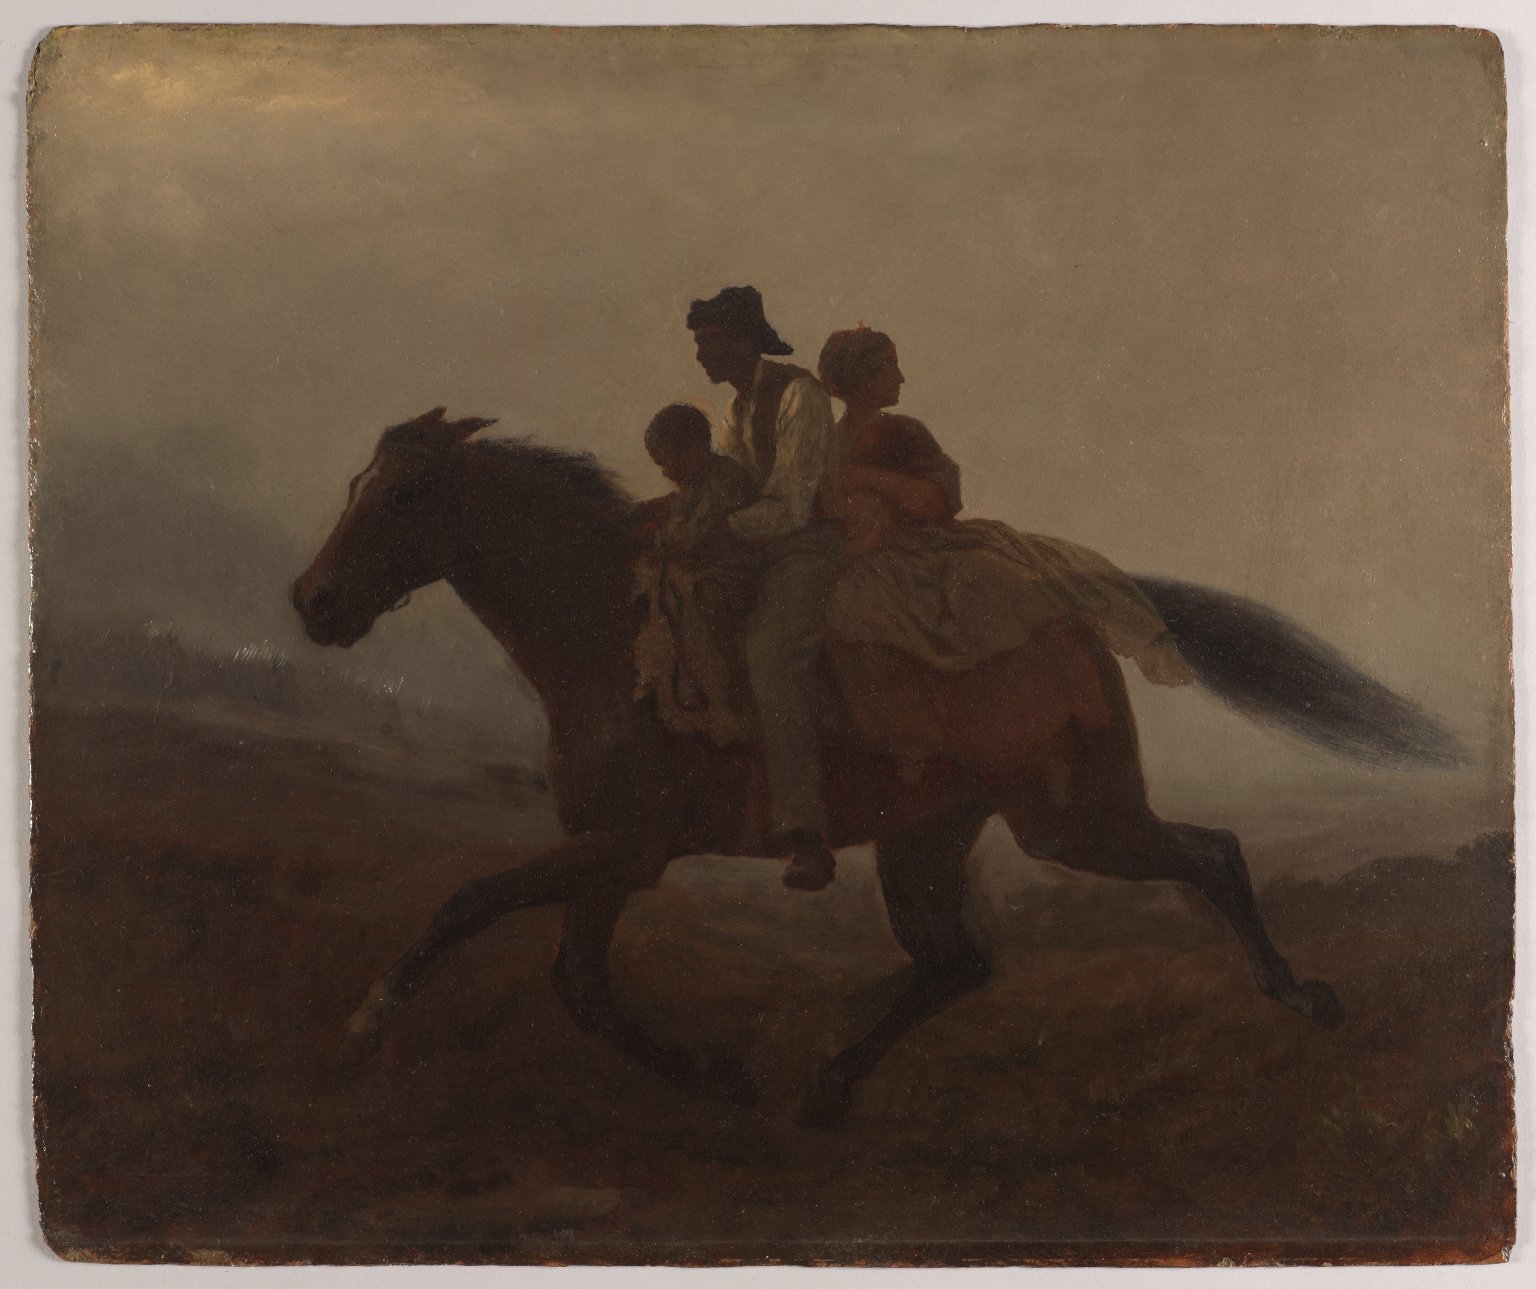 Eastman Johnson, A Ride for Liberty — The Fugitive Slaves, c. 1862, oil on paper board, 55.8 x 66.4 cm (Brooklyn Museum)